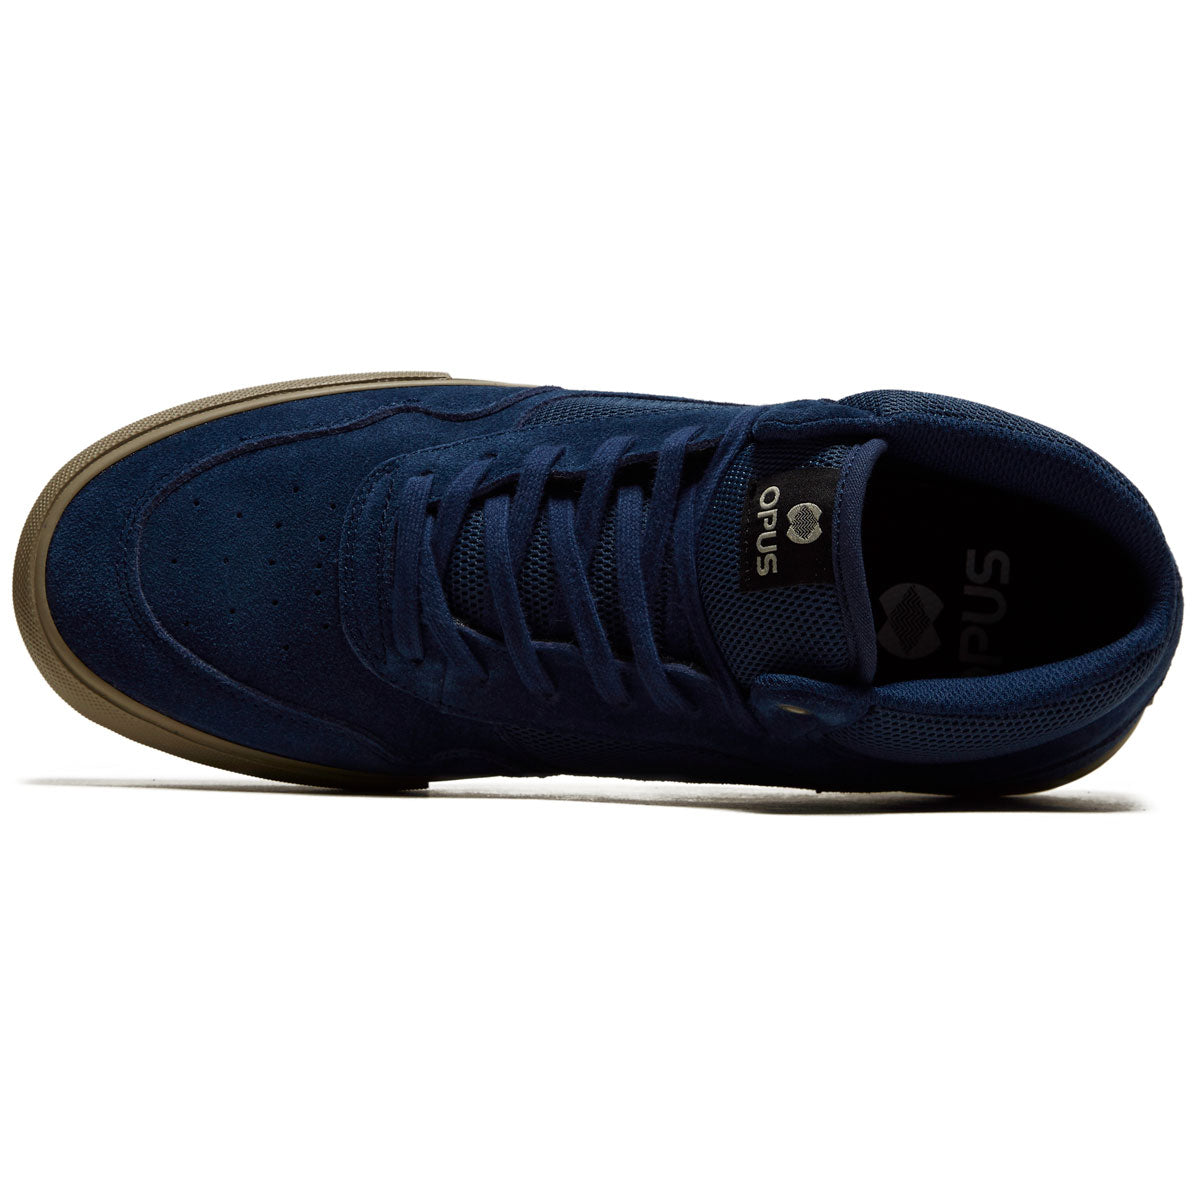 Opus Standard Mid Shoes - Navy/Cream image 3